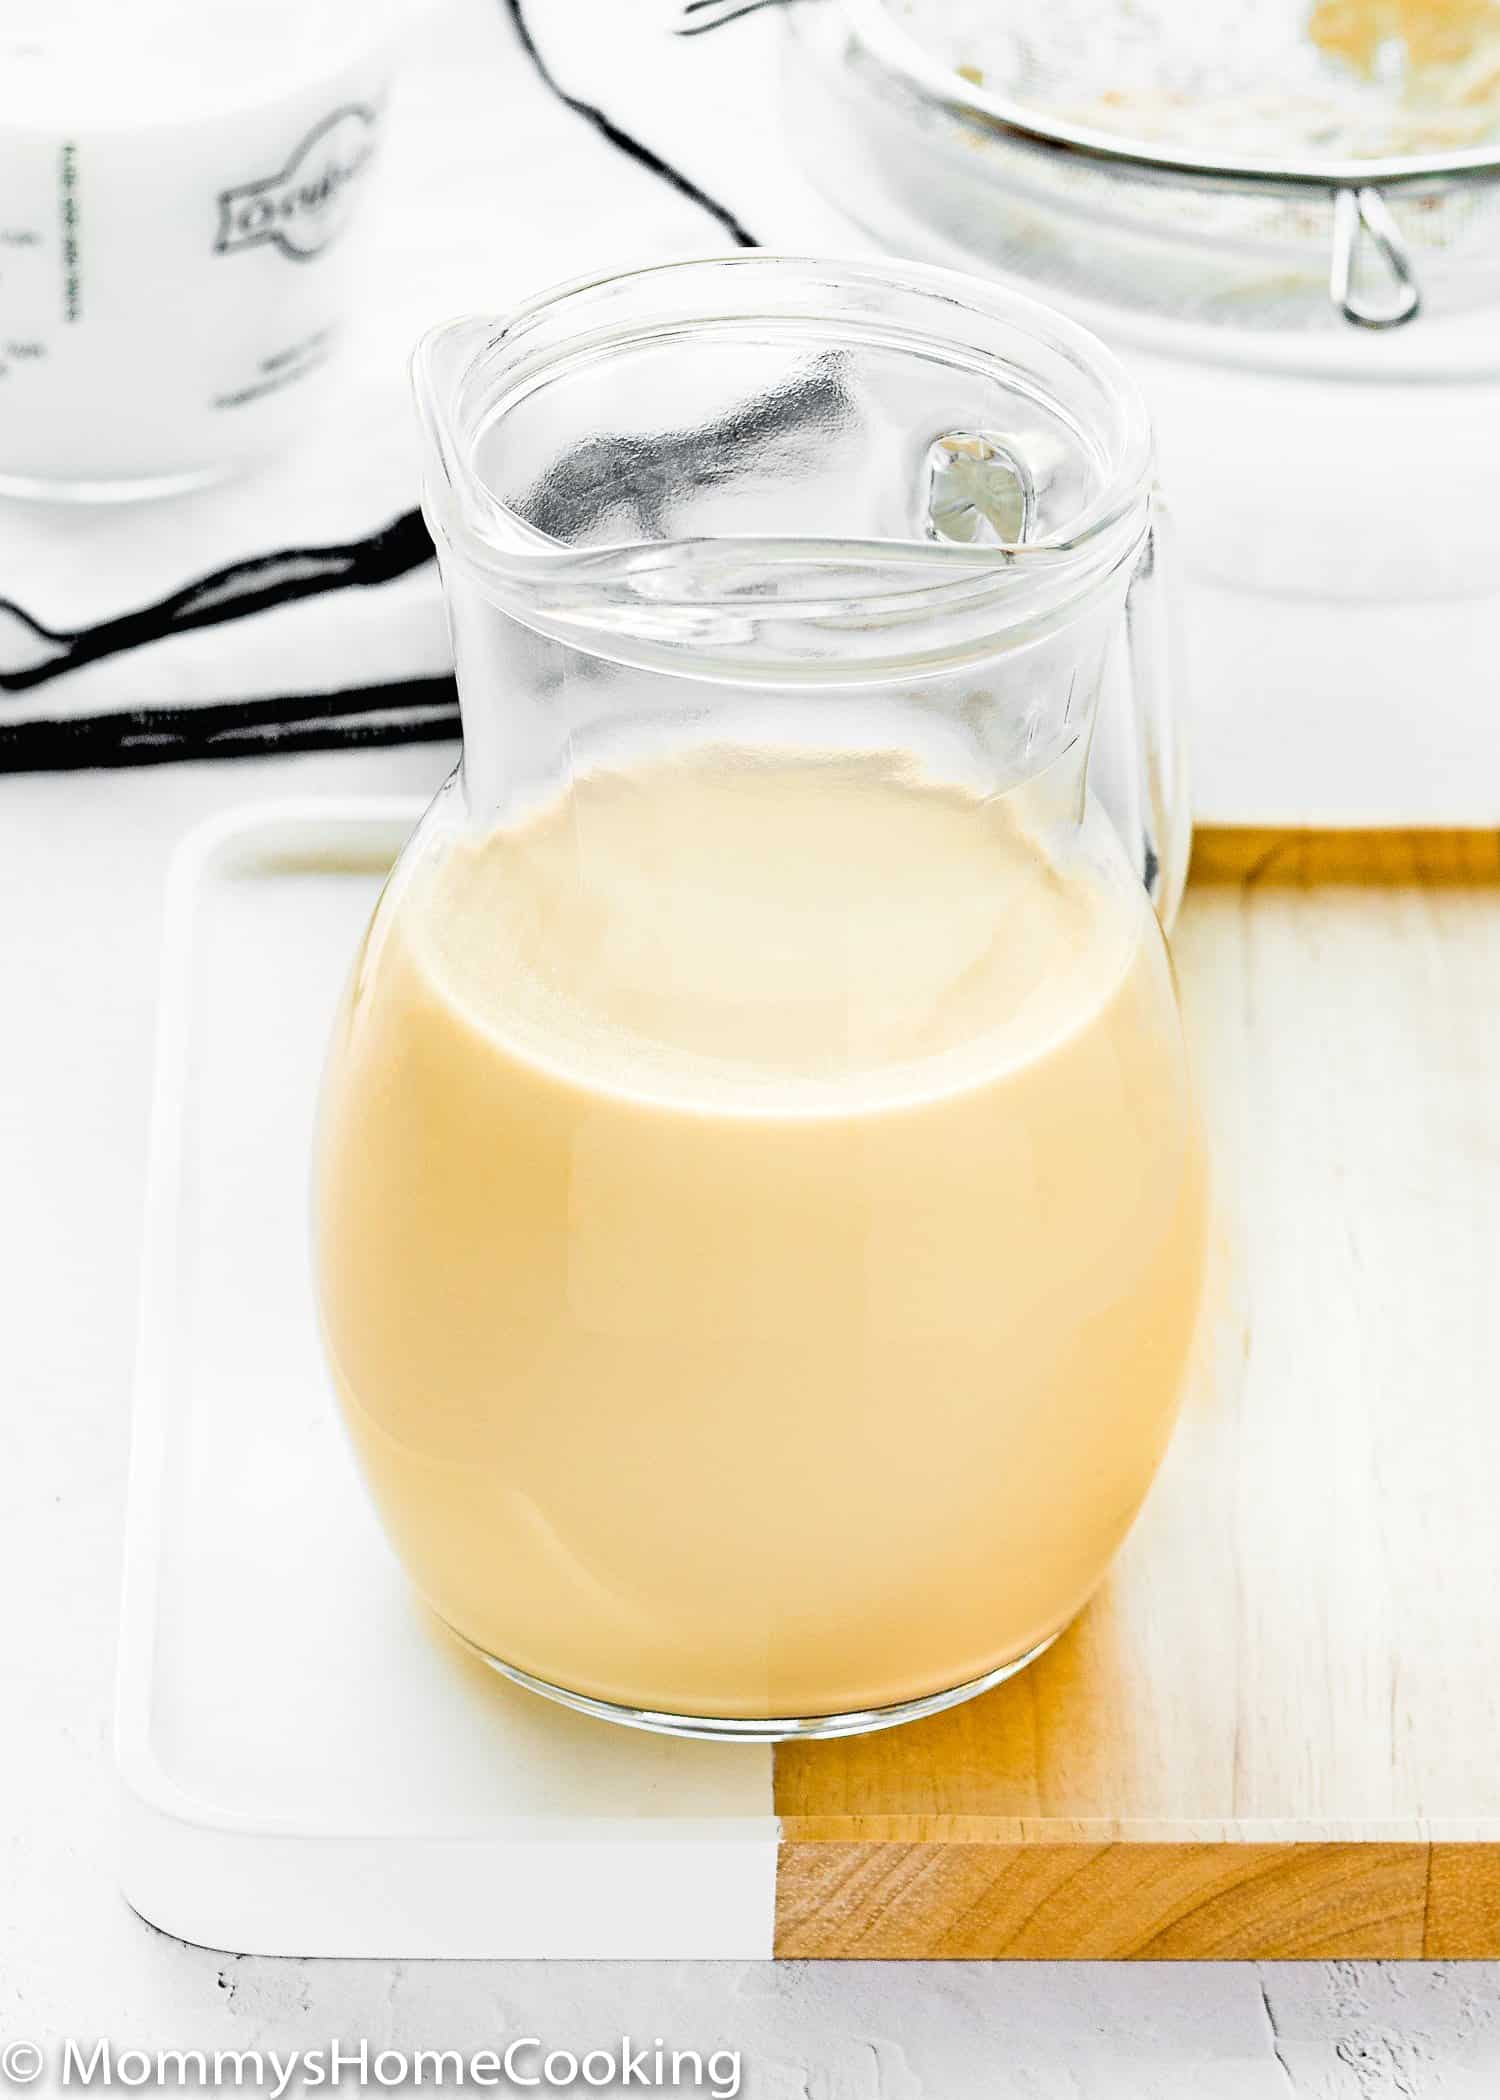 Homemade evaporated milk in a jar